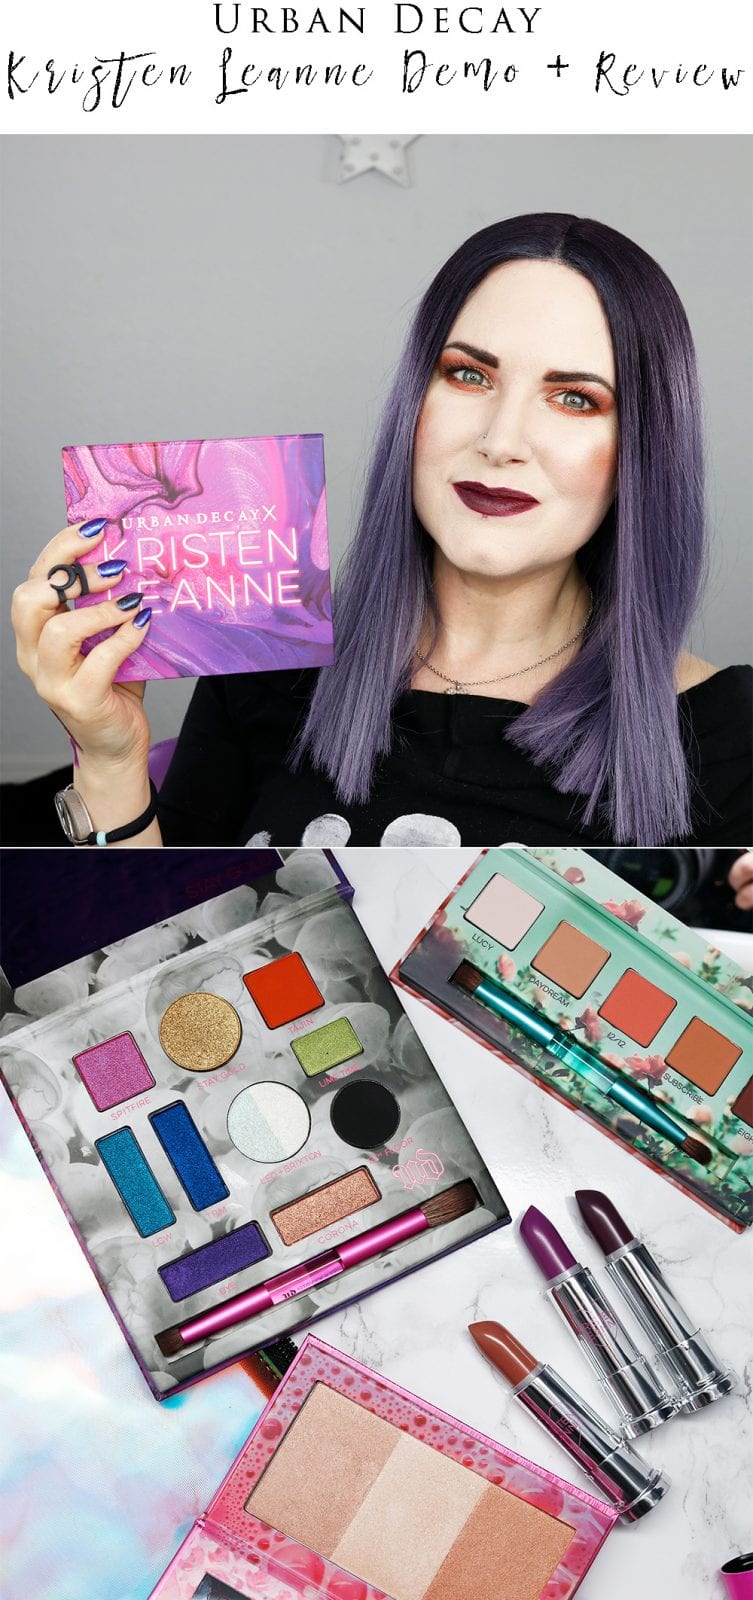 Urban Decay Kristen Leanne Collection Review + Demo of all Shades on my eyes and face!